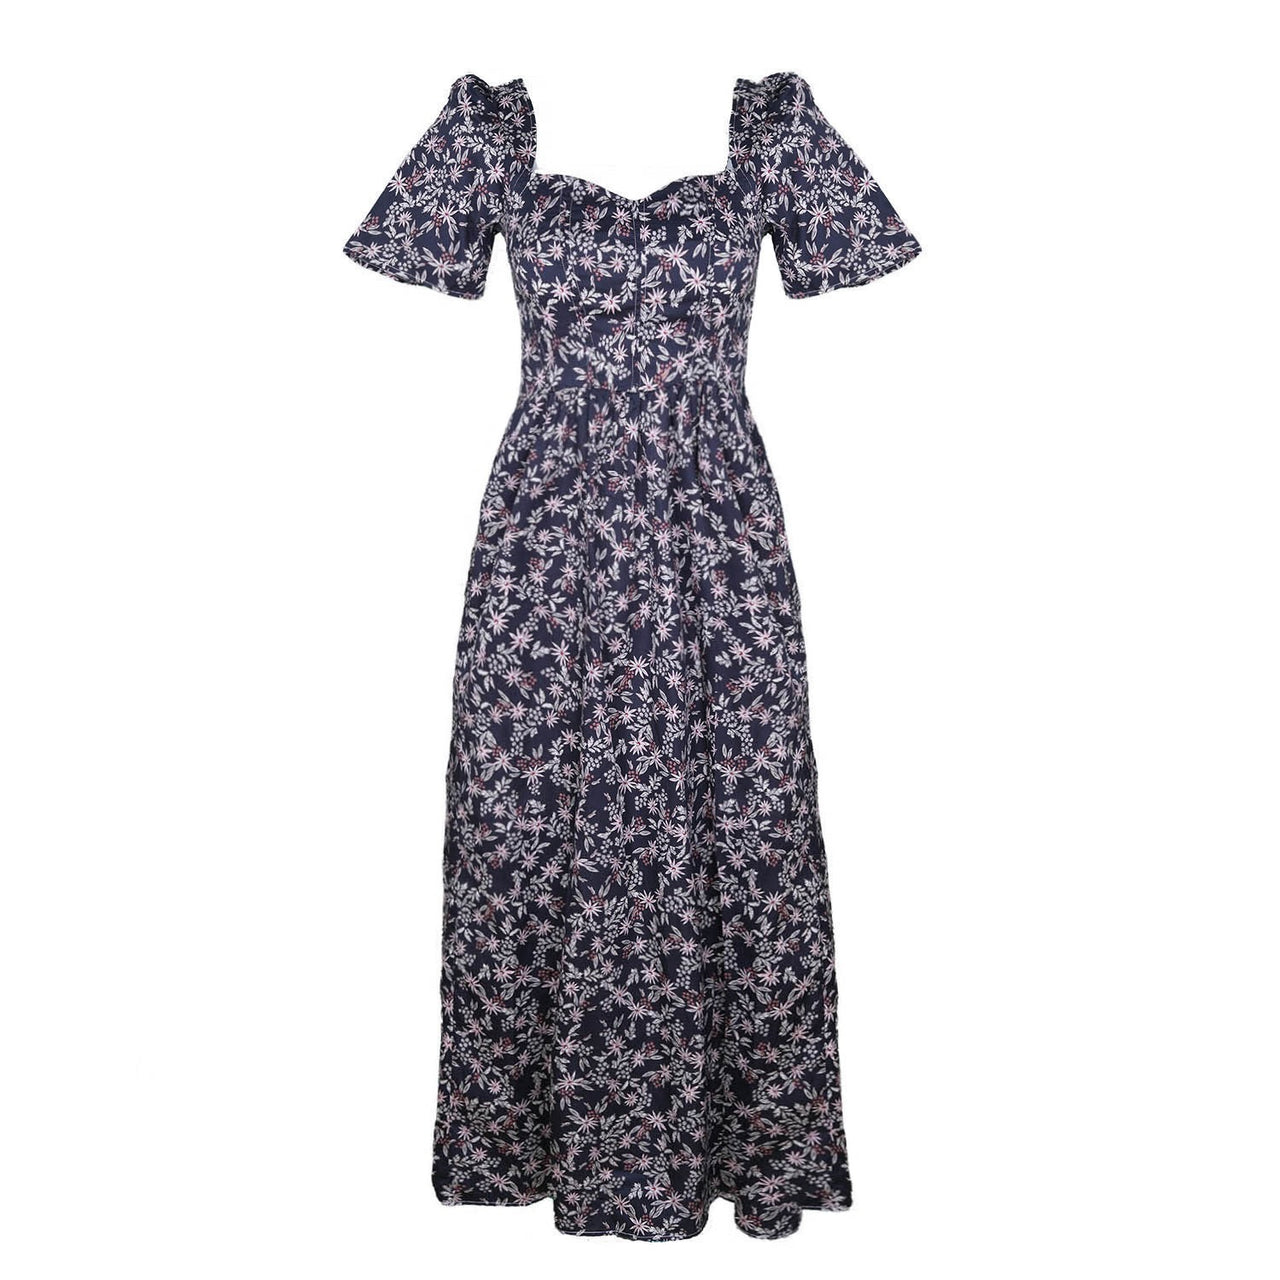 Beatrice Maxi Dress with Sweetheart Neckline / Black Floral Cotton